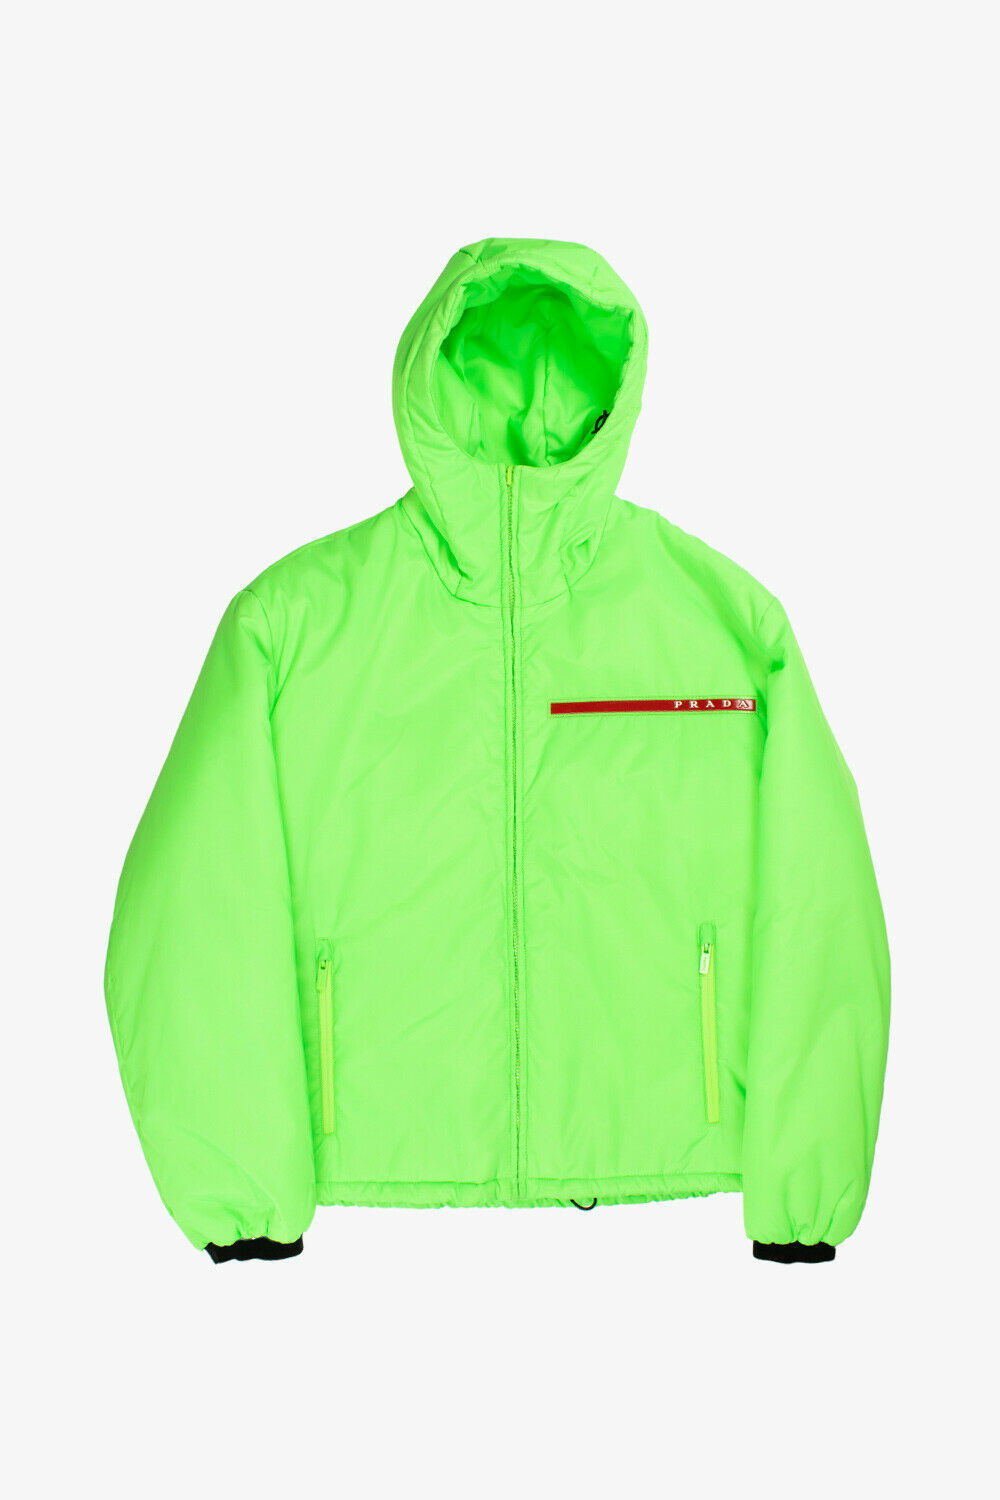 https://the-collectory.com/cdn/shop/products/Prada-Iconic-Linea-Rossa-Pistacchio-Green-Fluorescent-Liner_1000x.jpg?v=1605729670